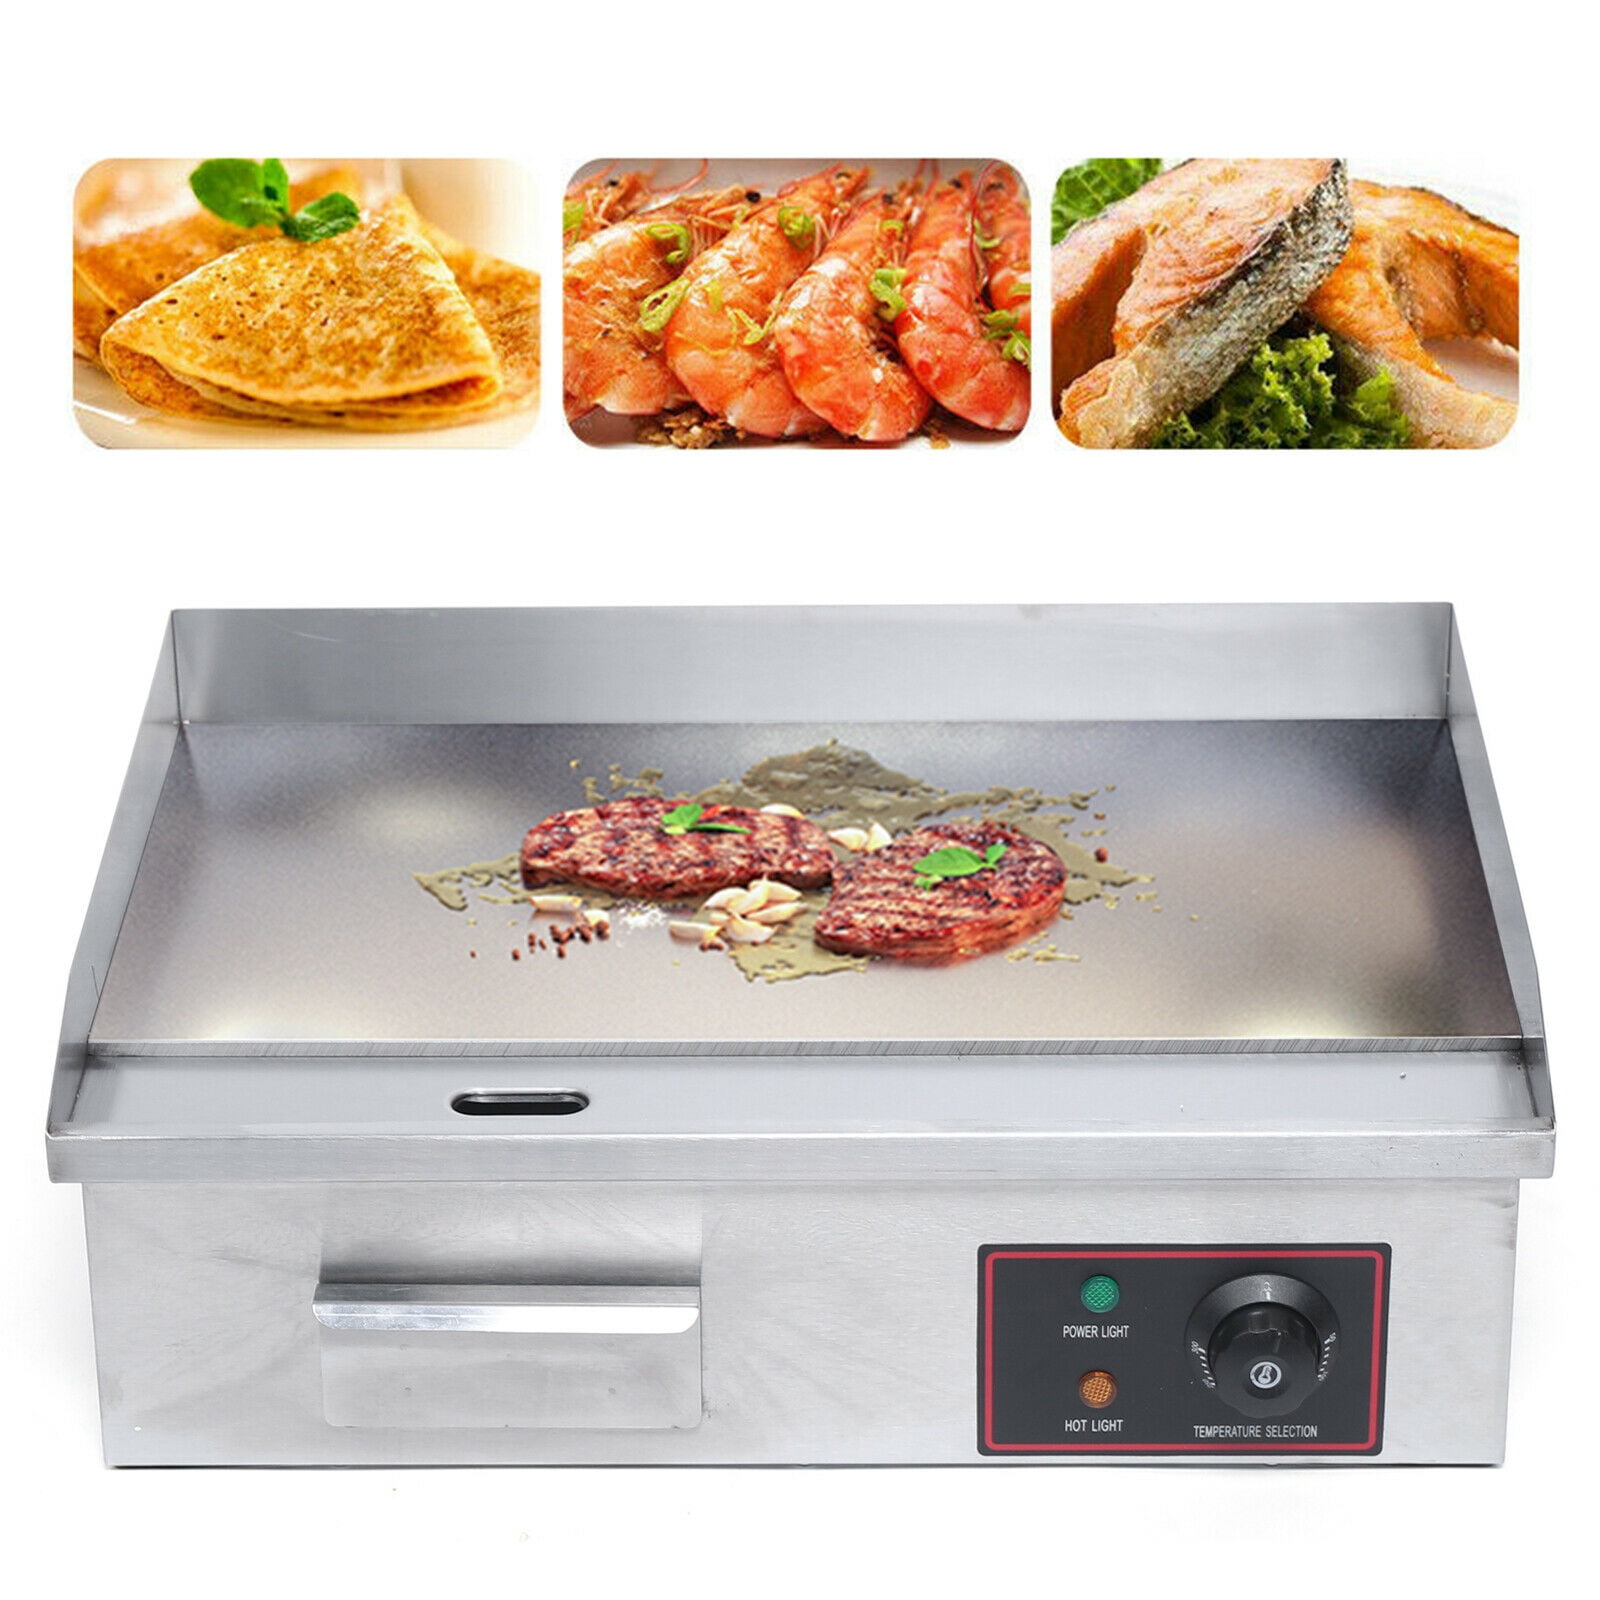 StainlessSteel 73cm Commercial Catering Griddle BBQ Grill Hotplate Flat Electric 